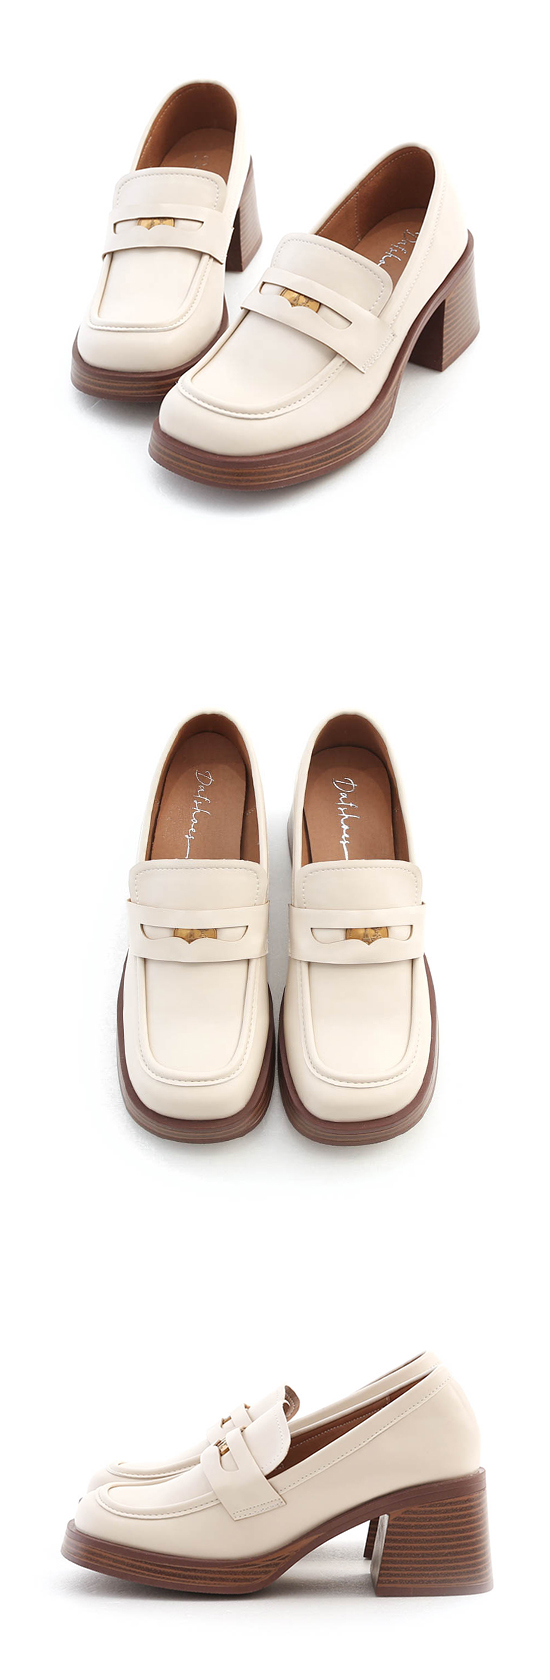 Lucky Gold Coin Wooden Heel Loafers Vanilla